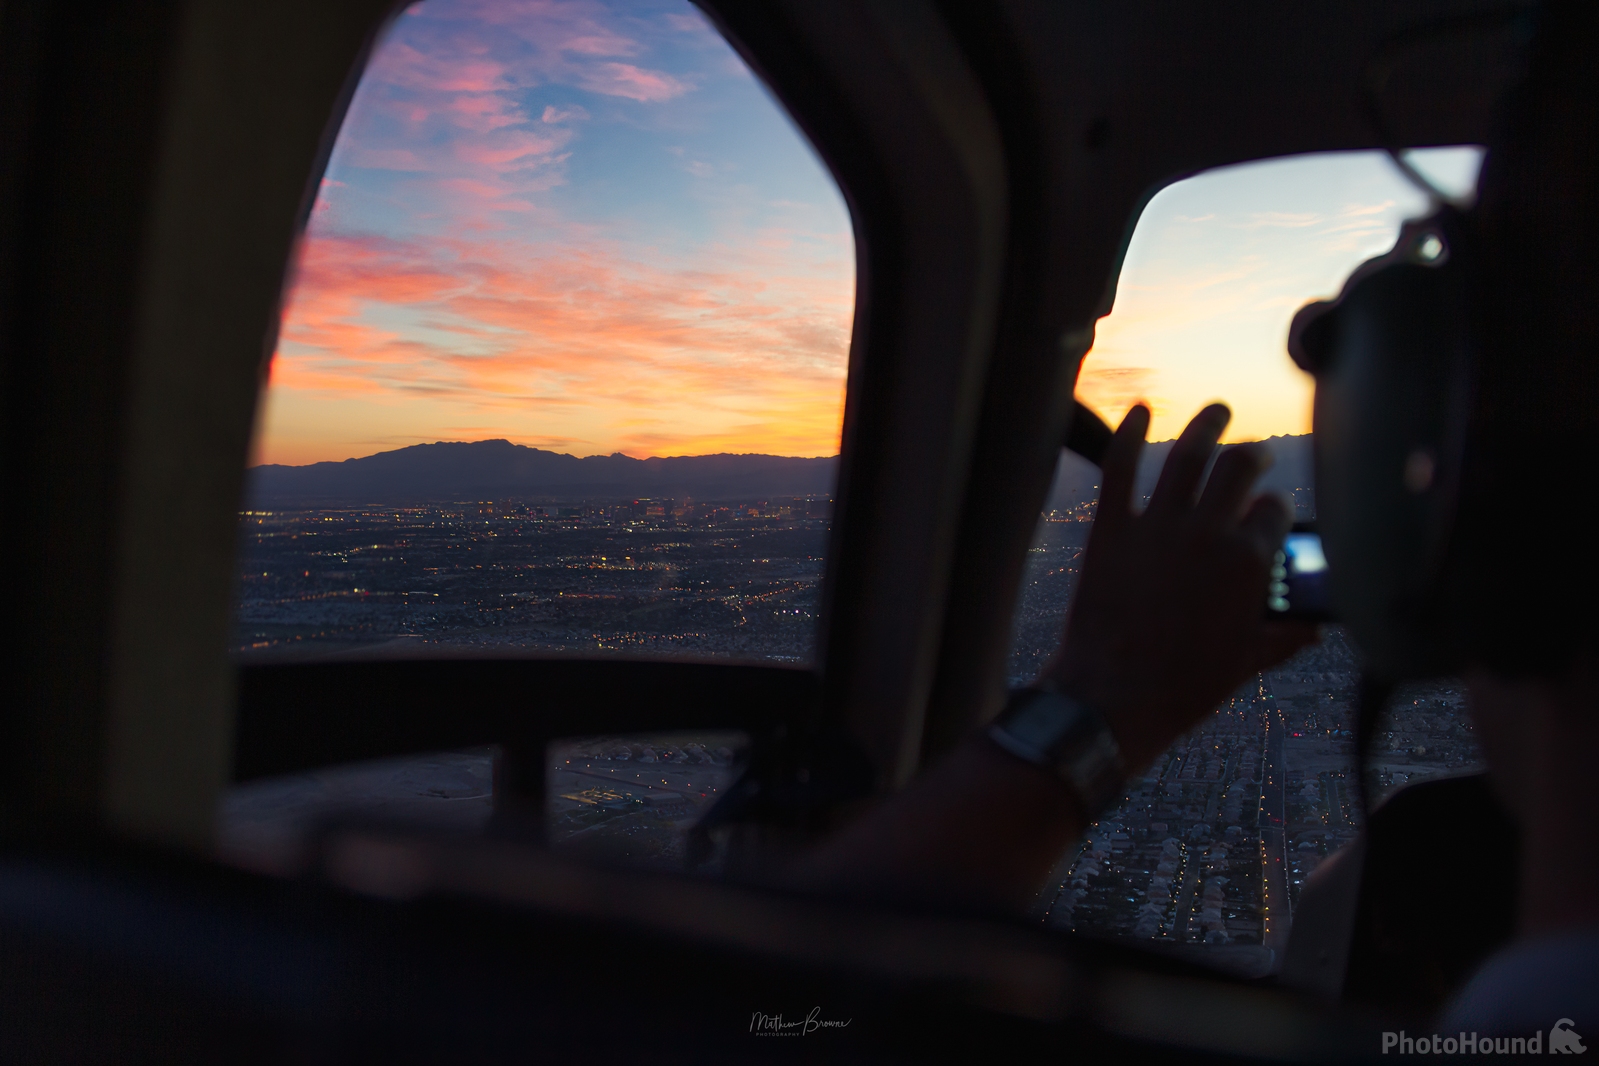 Image of Las Vegas Helicopter Tours by Mathew Browne